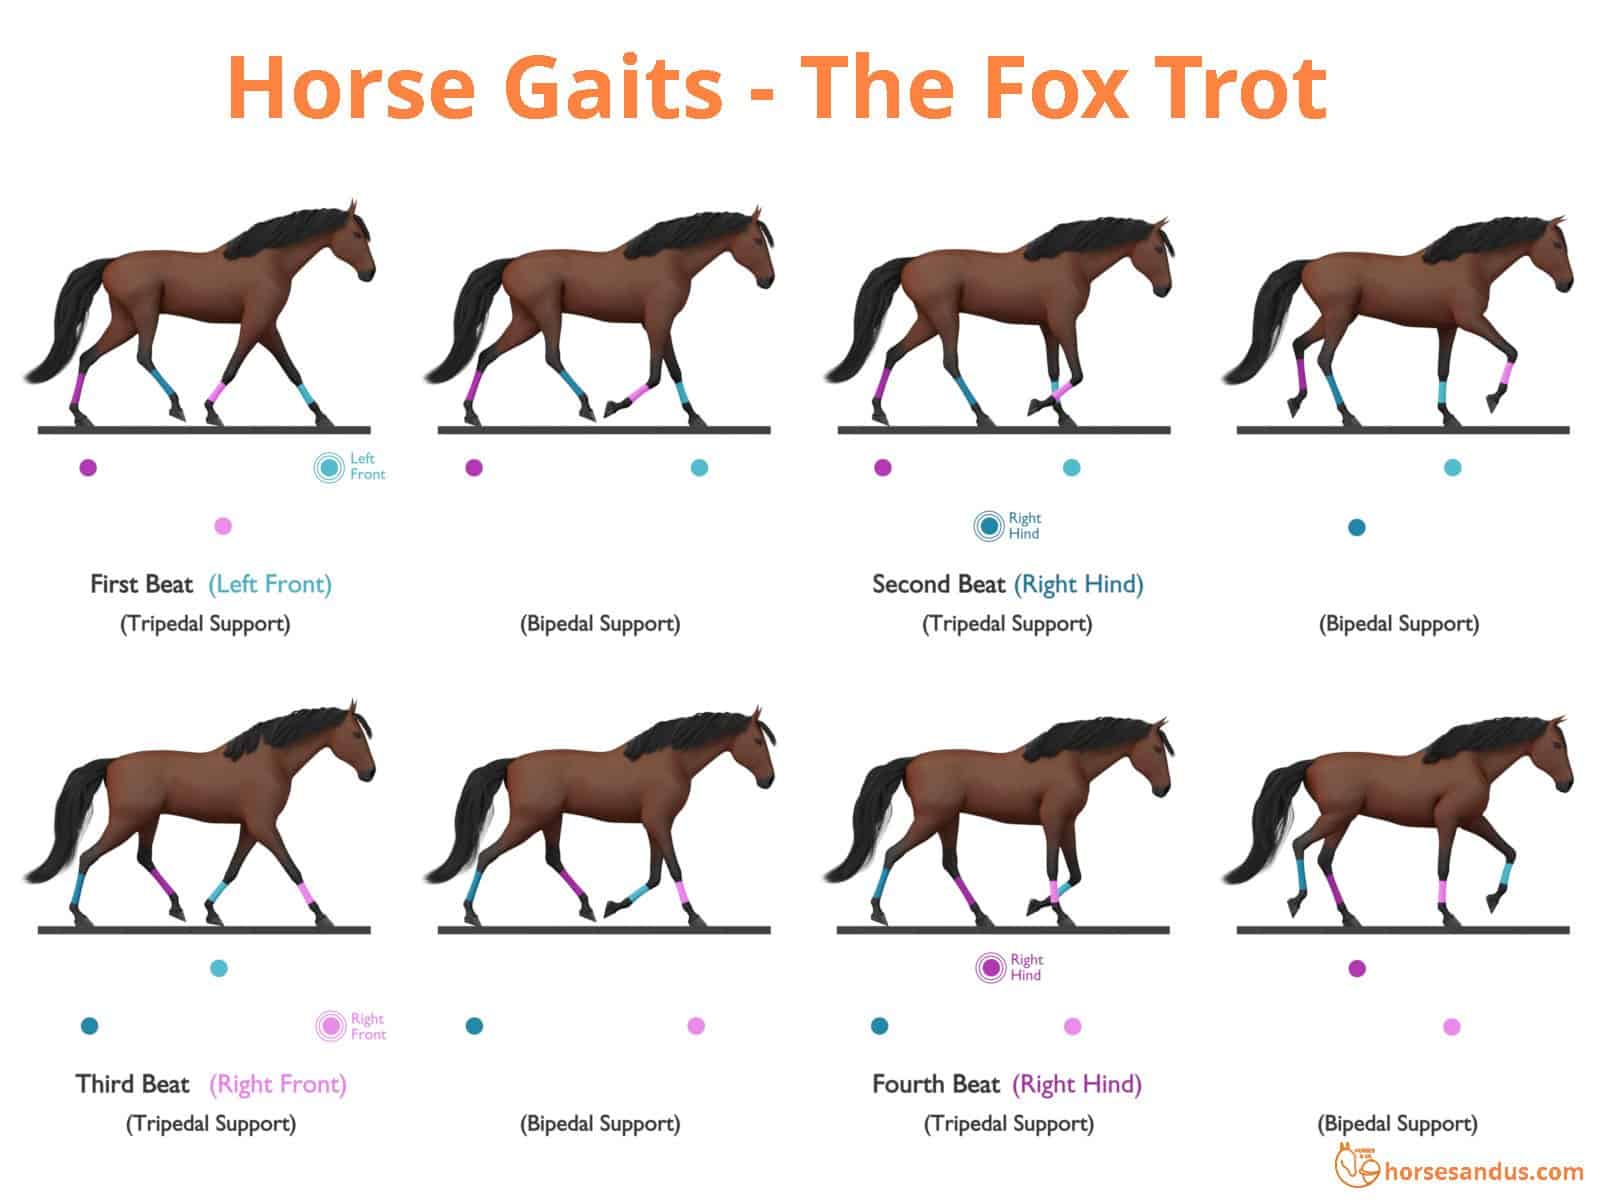 Sequence of footfalls for the Fox Trot